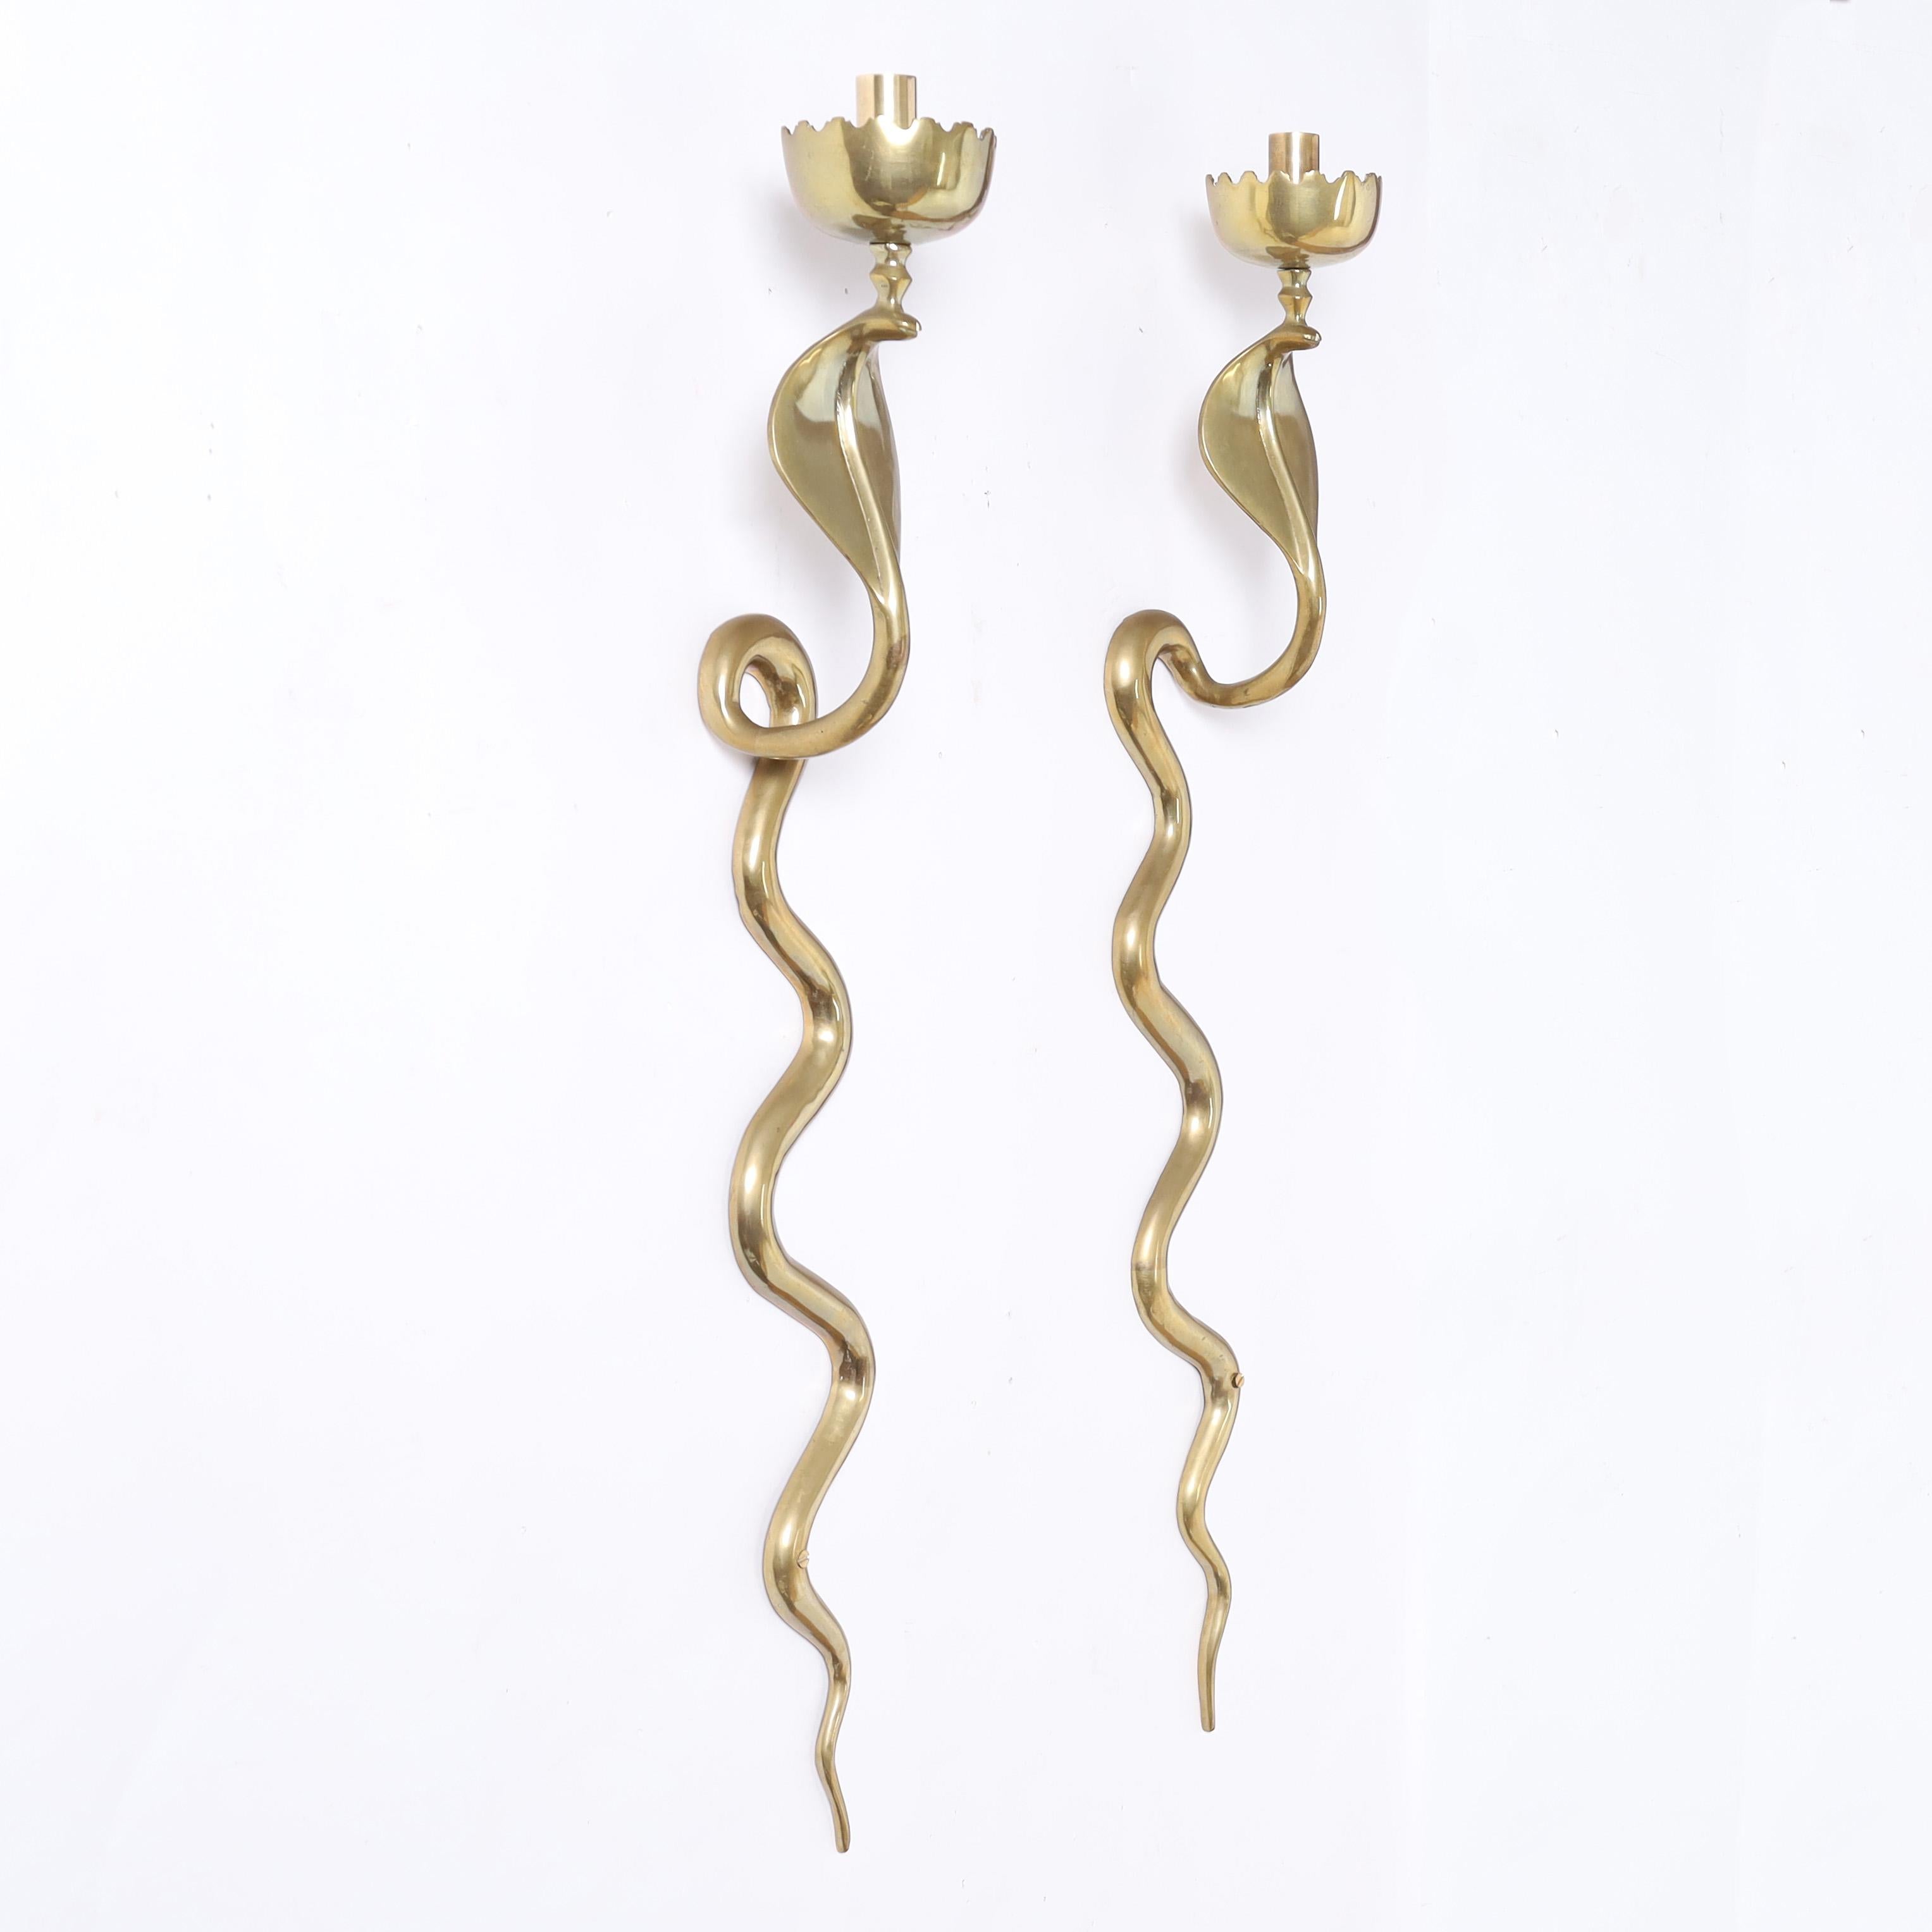 Striking pair of mid century Anglo Indian polished brass cobra or snake wall sconces. 